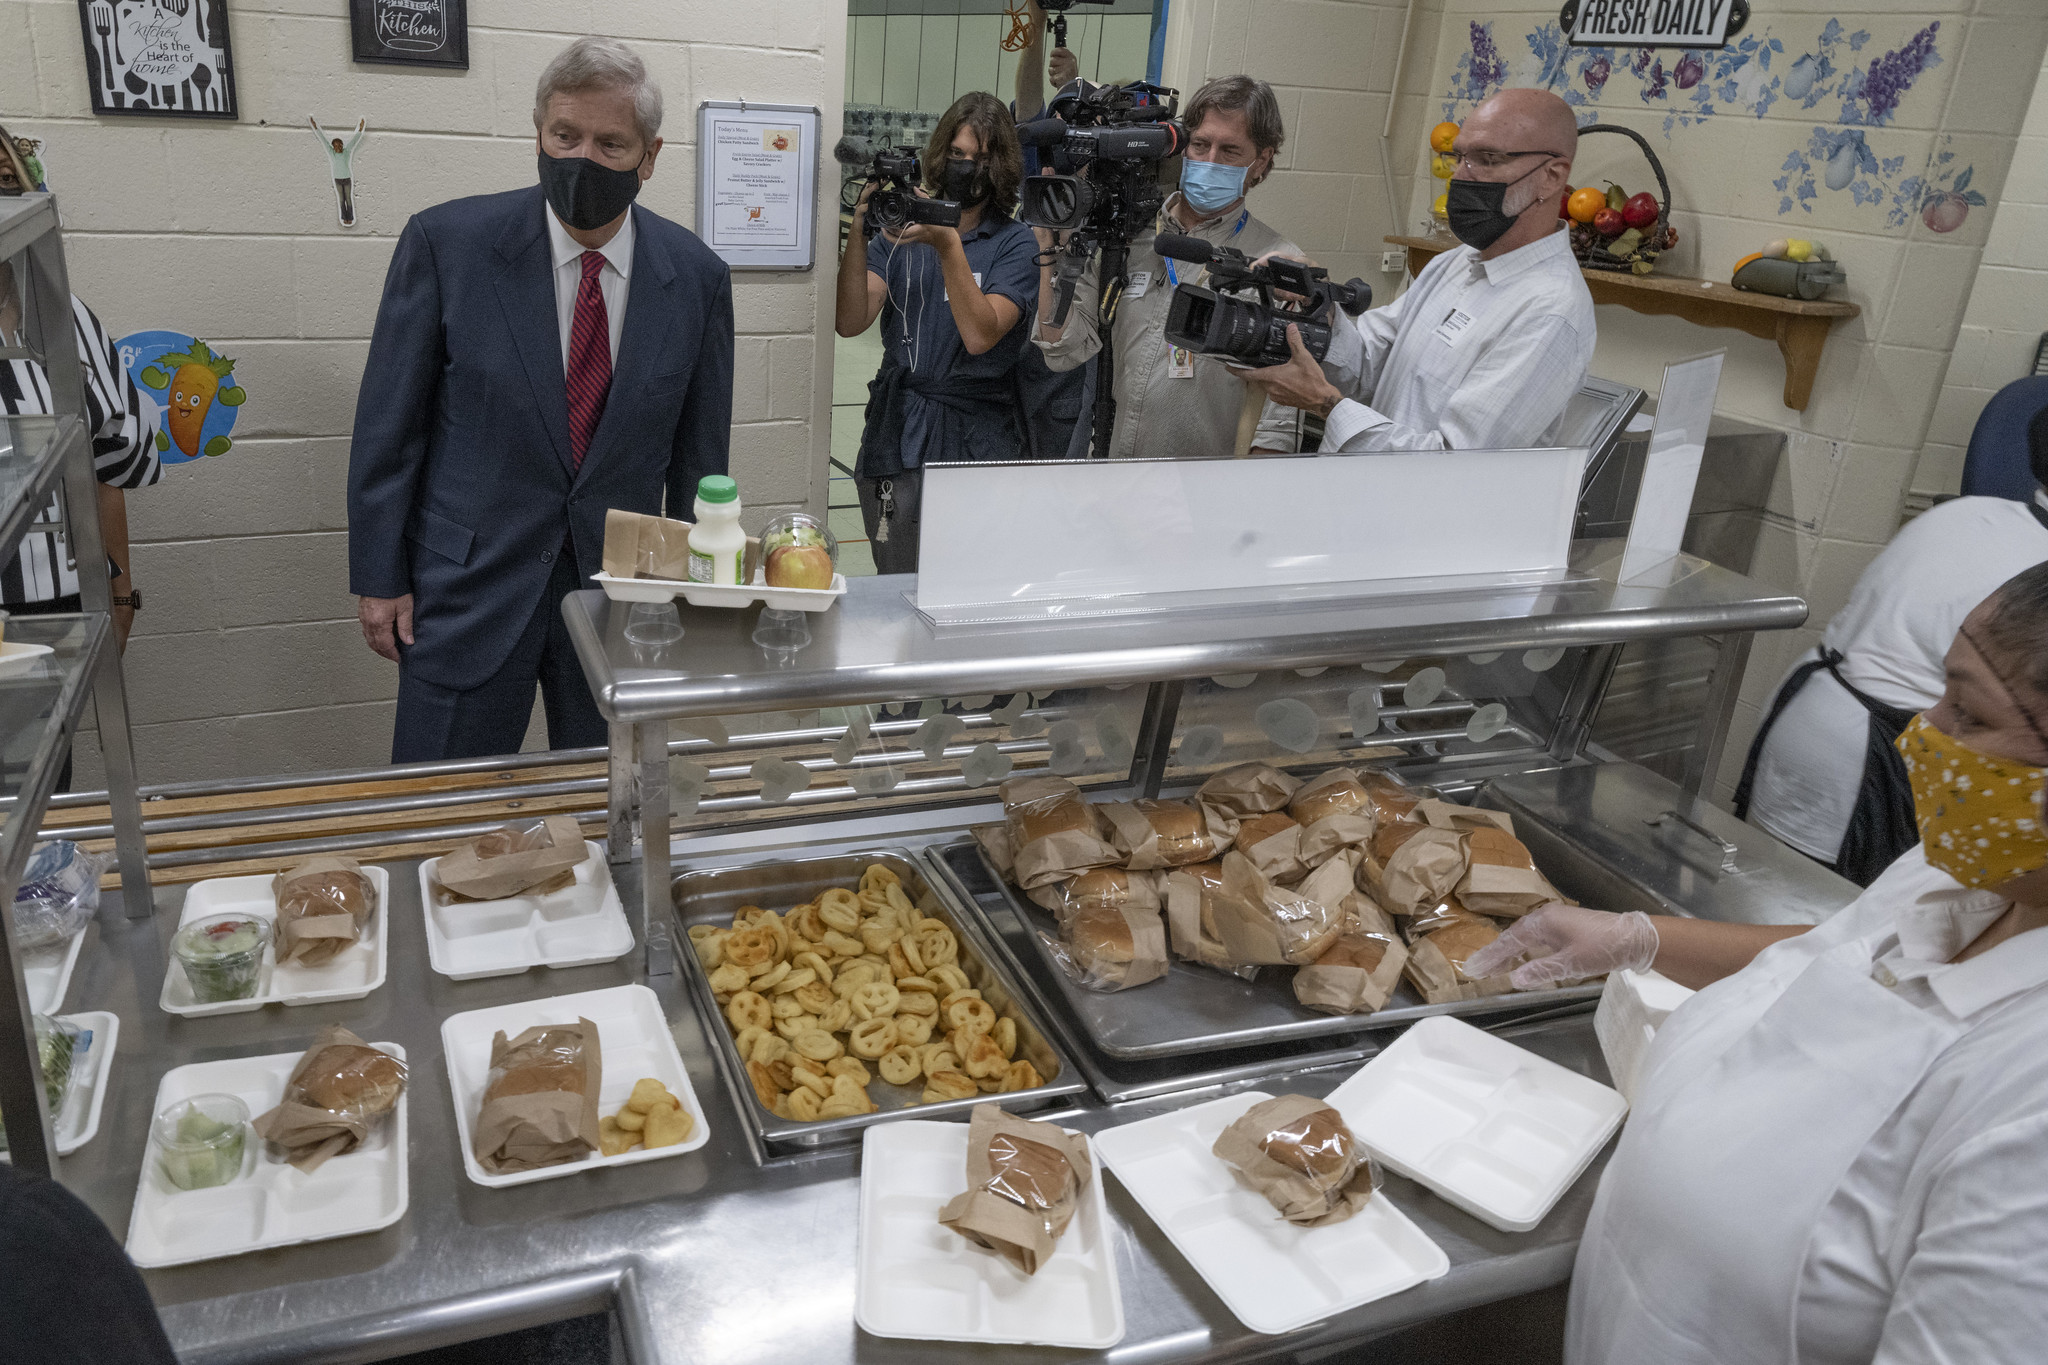 Agriculture Secretary Tom Vilsack tours Riverdale Elementary School during the lunch service